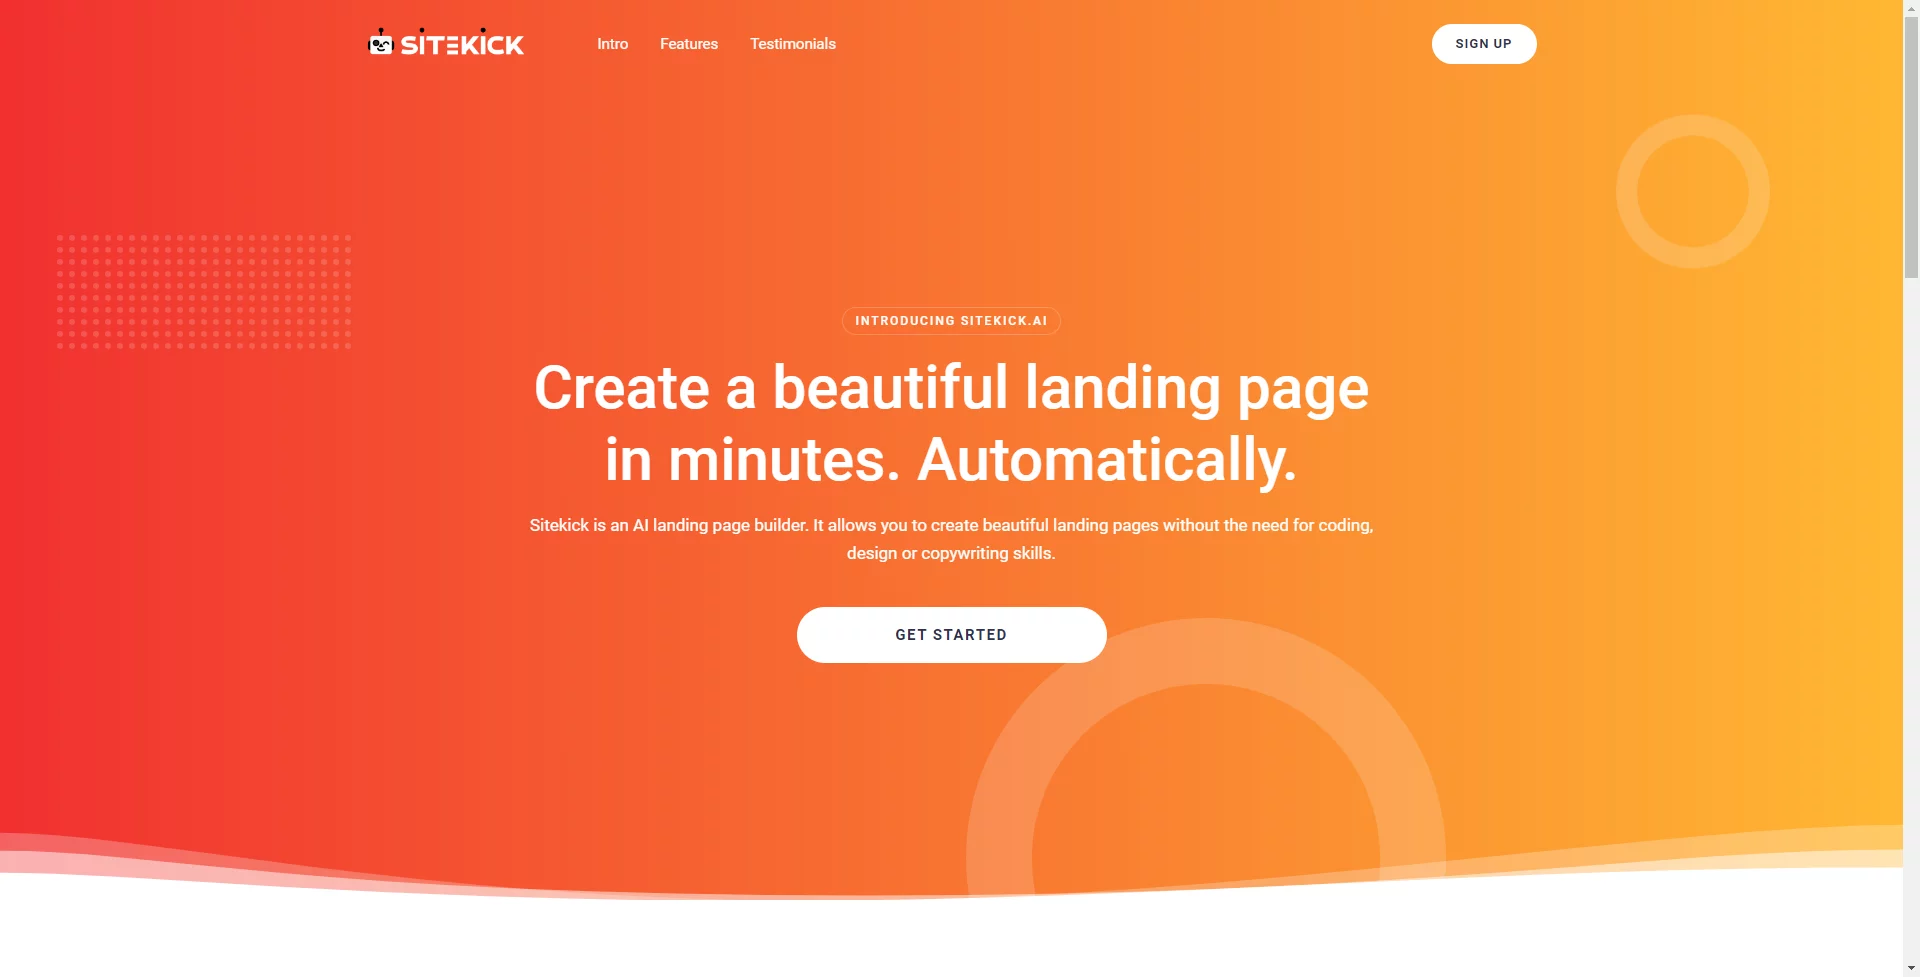  Create beautiful landing pages with Sitekick's AI